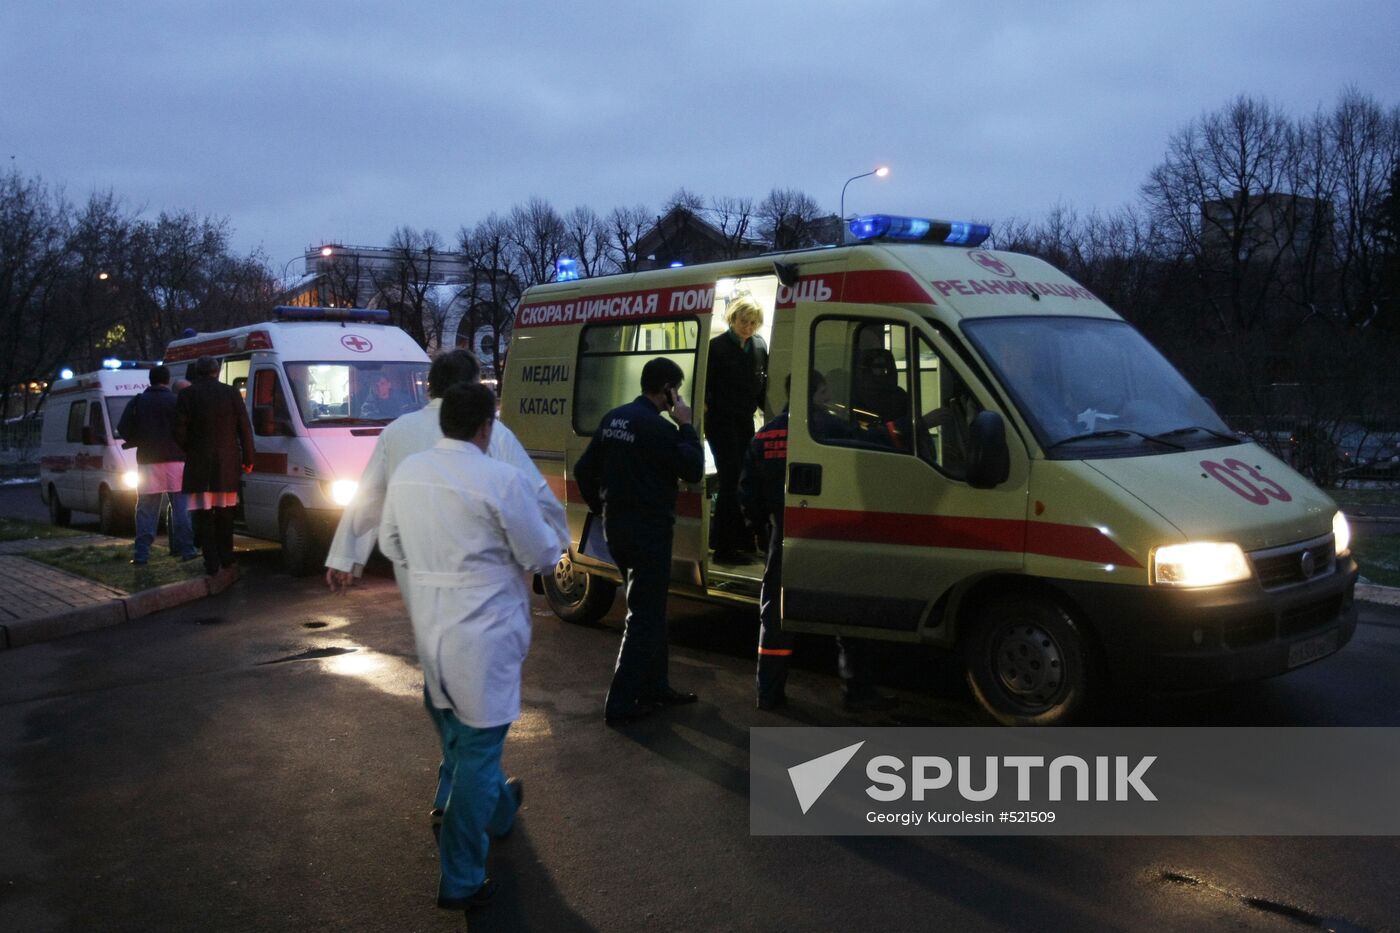 Perm nightclub fire victims brought to Moscow's hospitals